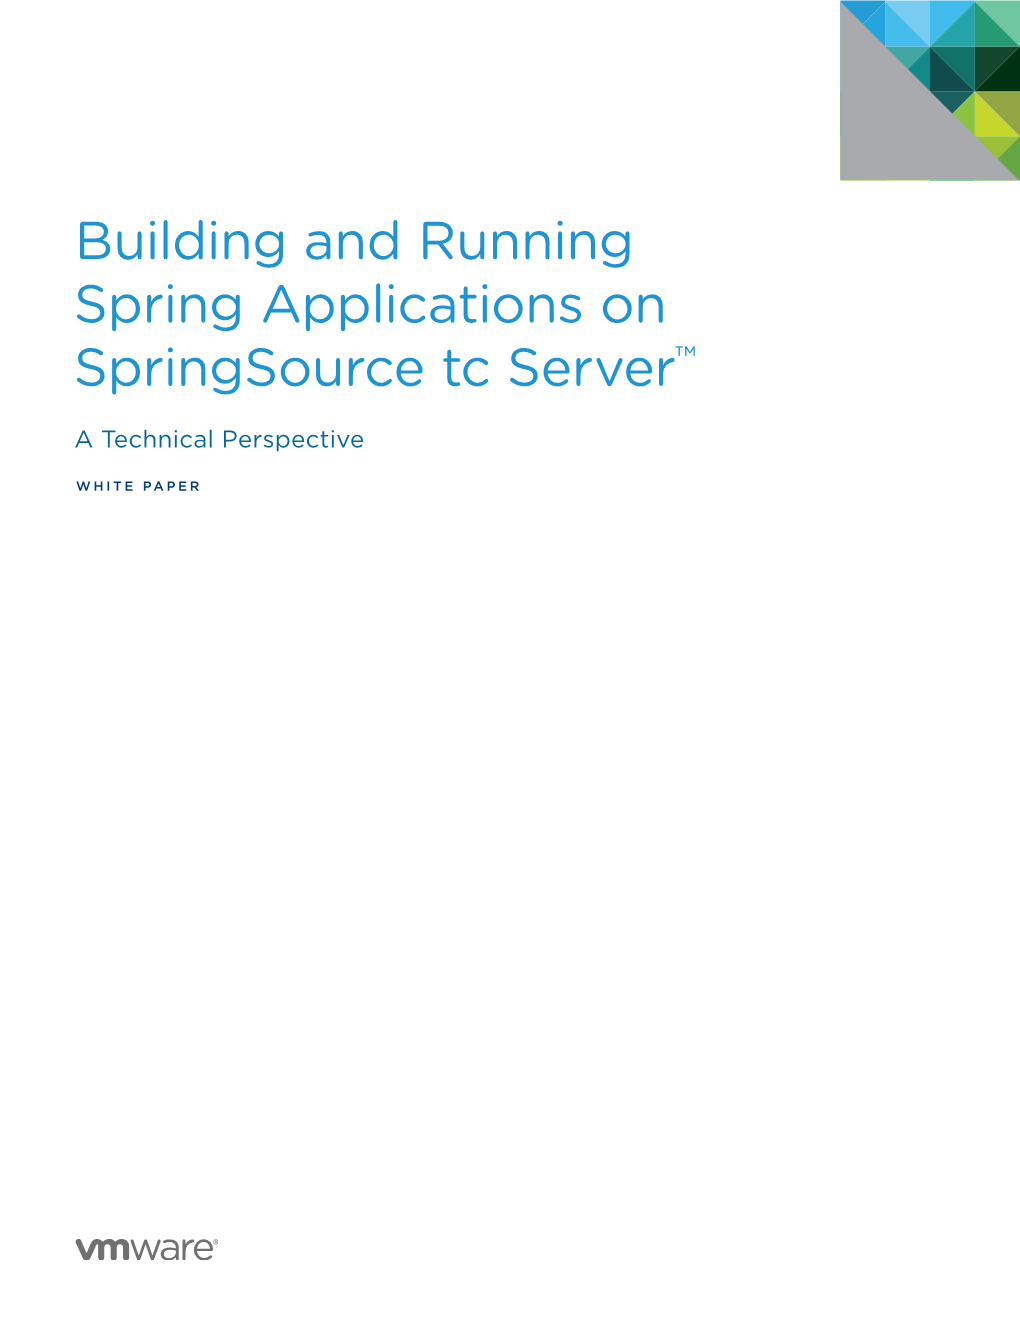 Building and Running Spring Applications on Springsource Tc Server™